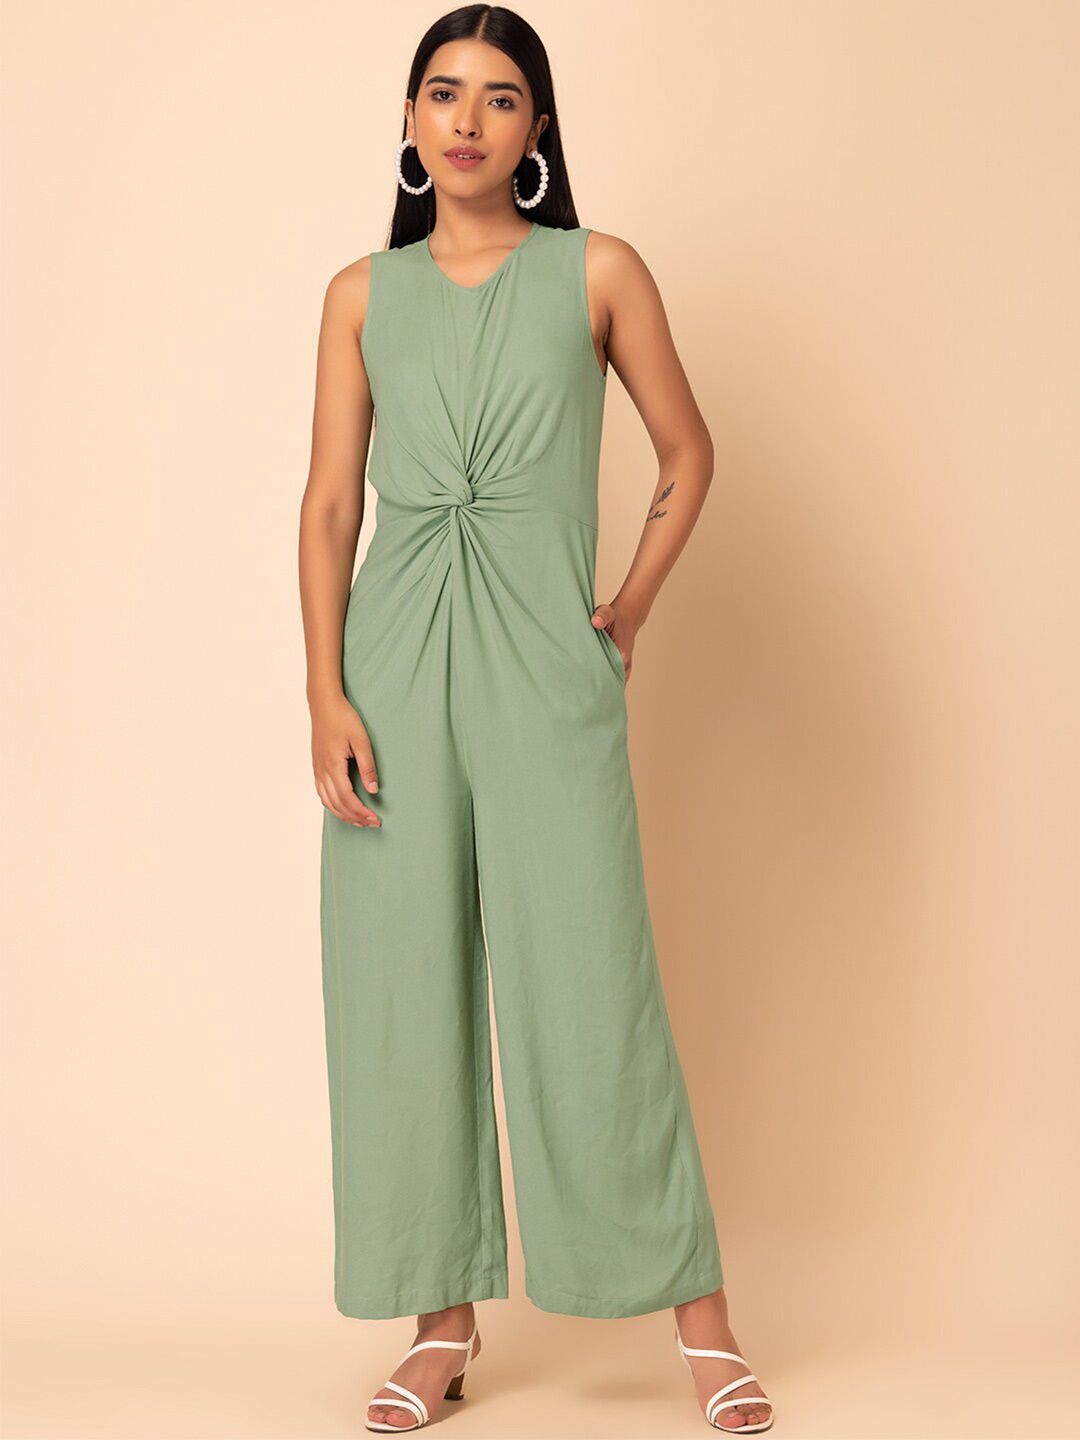 INDYA Green Front Knot Jumpsuit Price in India